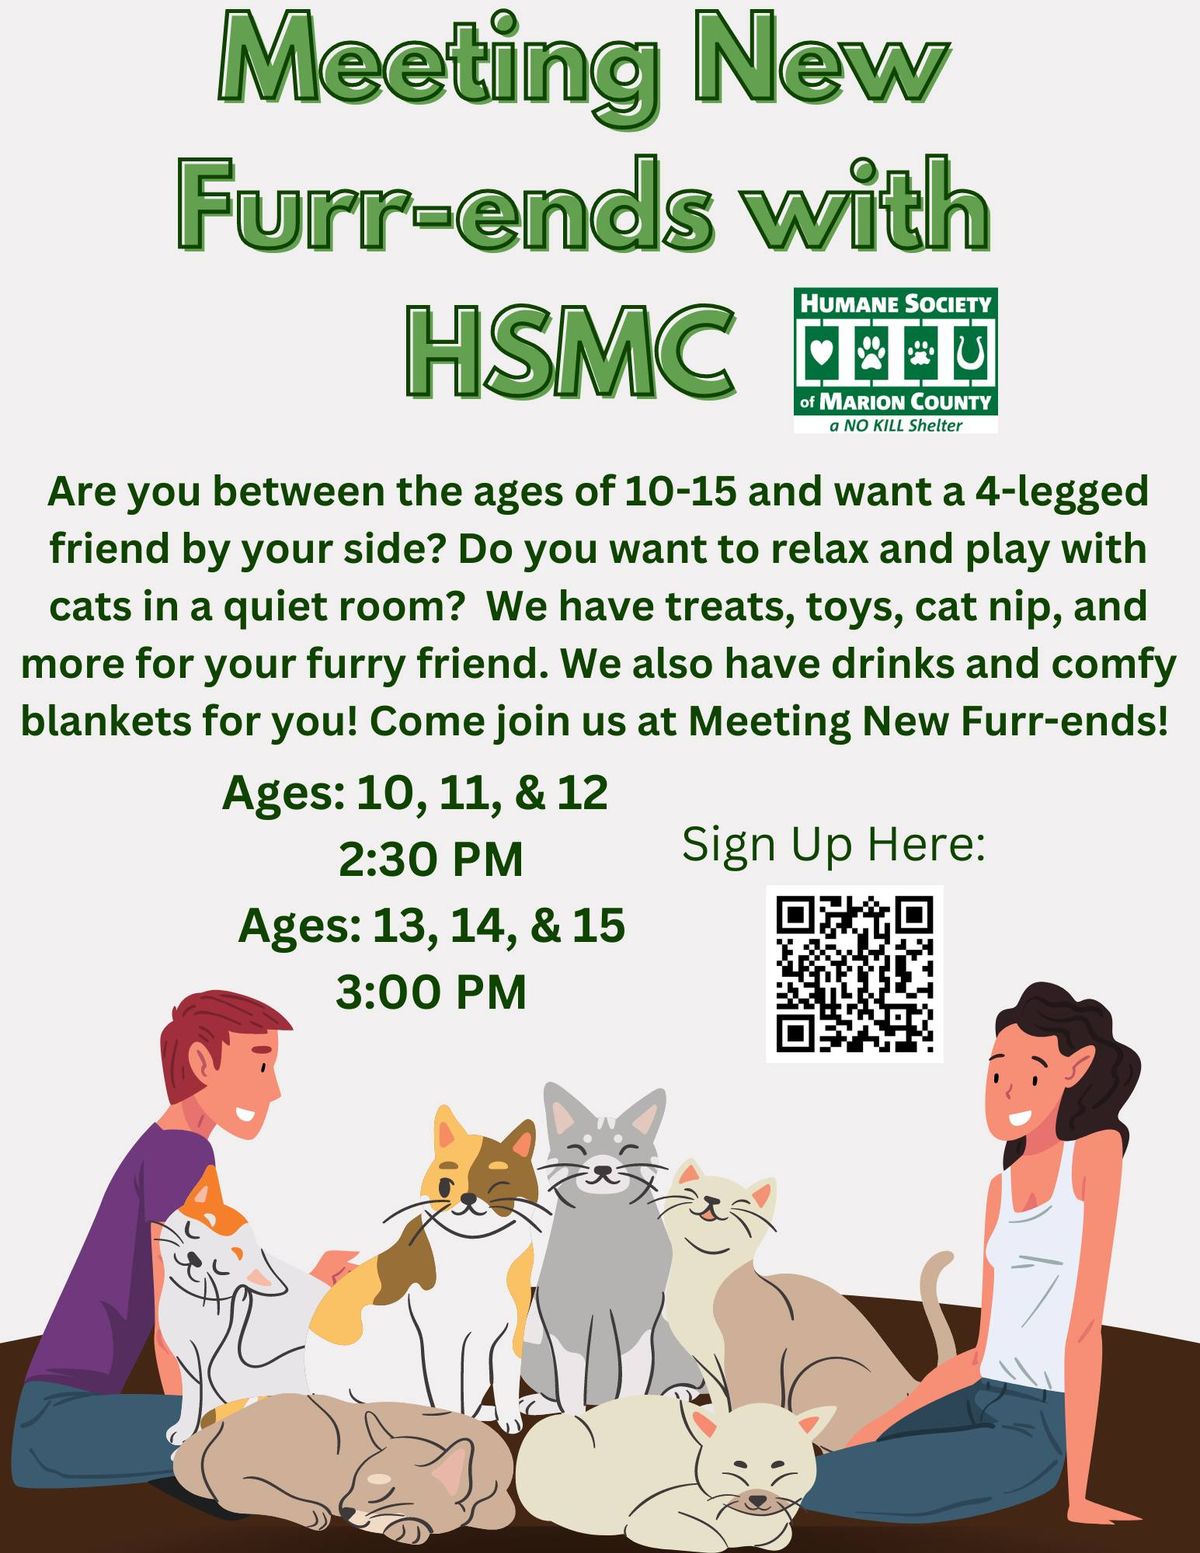 Meeting New Furr-ends with HSMC